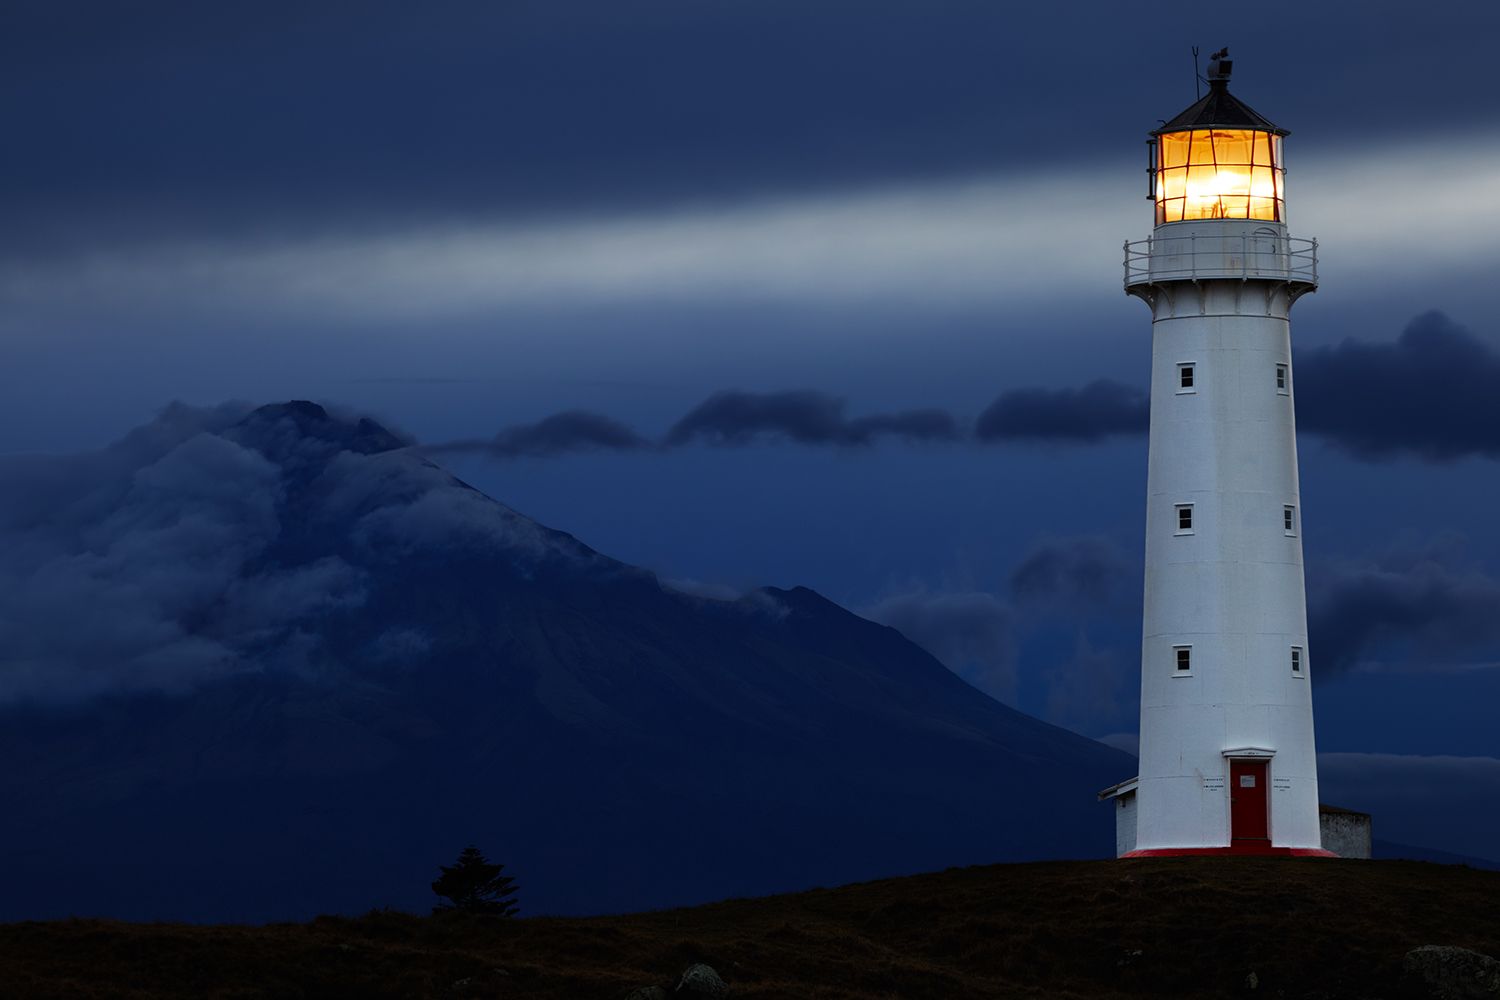 Lighthouse night view